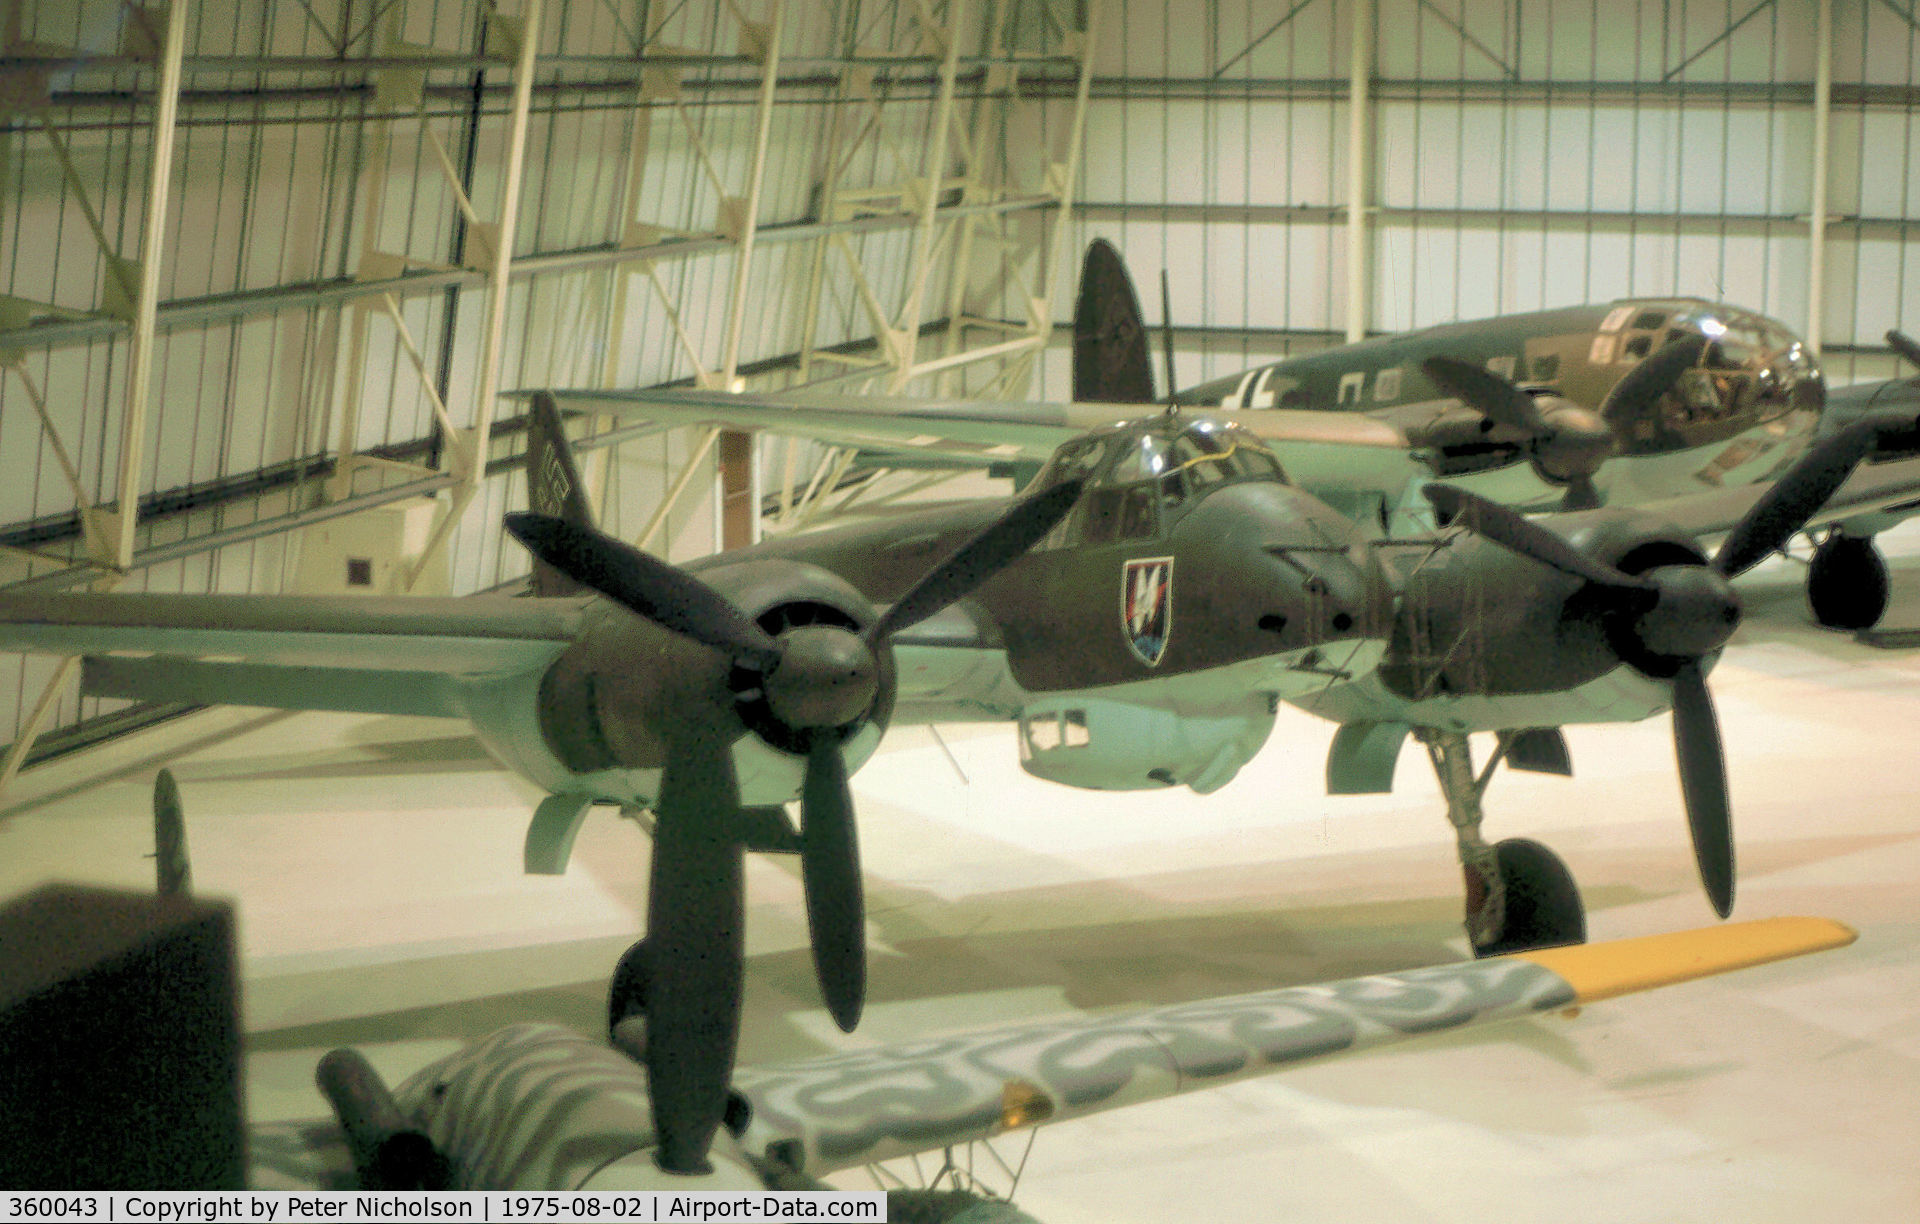 360043, Junkers Ju-88R-1 C/N 360043, Ju-88R as displayed at the Royal Air Force Museum at Hendon in the Summer of 1975.